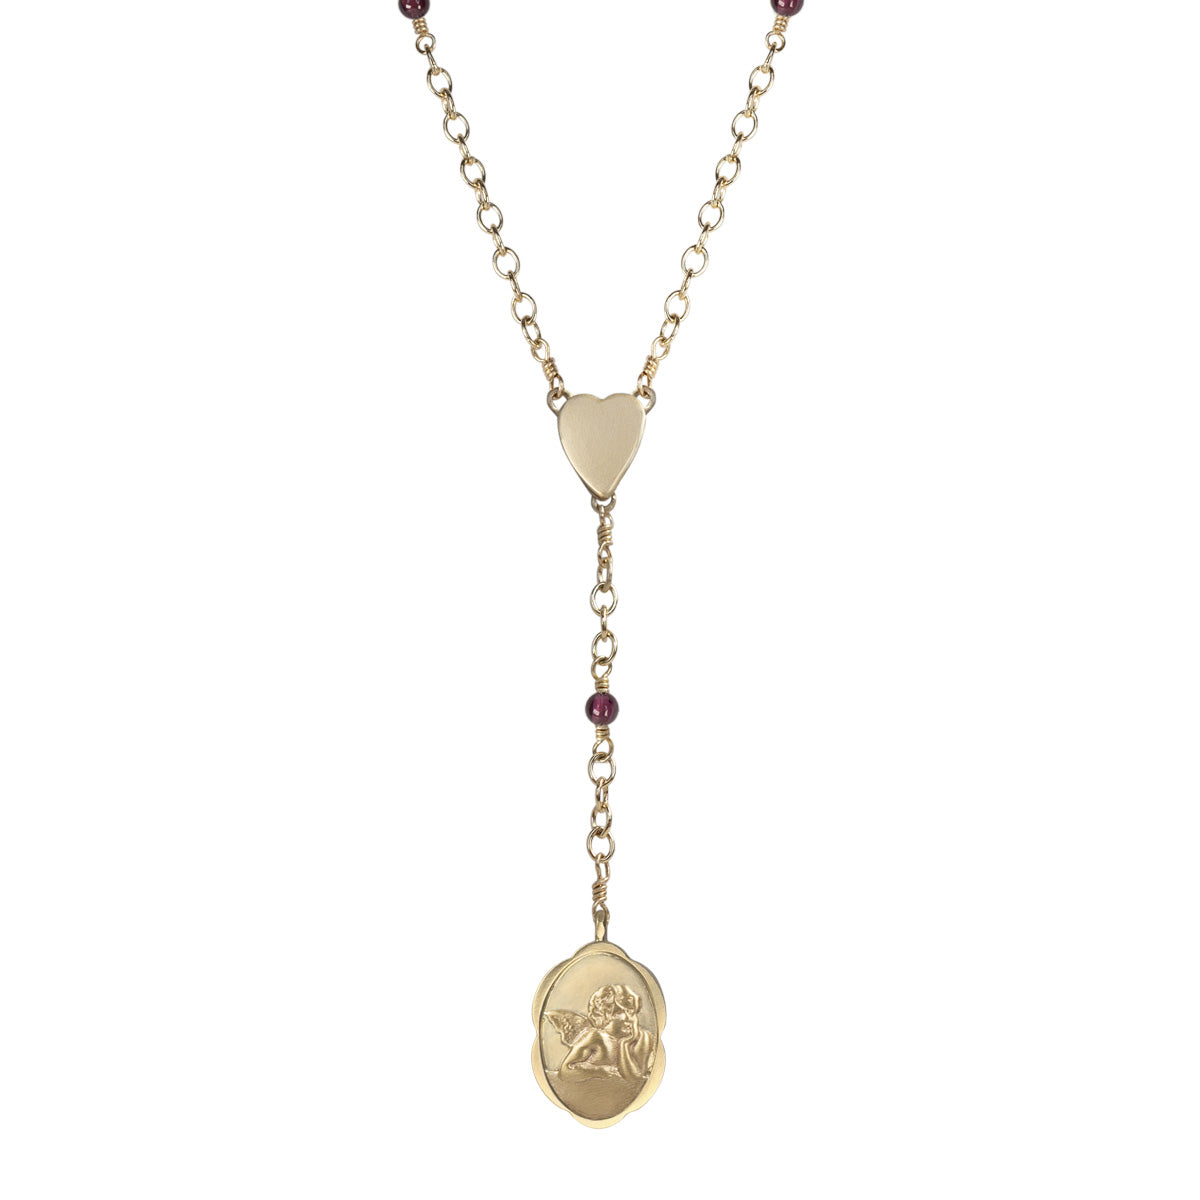 10K Gold Angel Rosary Necklace on Garnet Chain